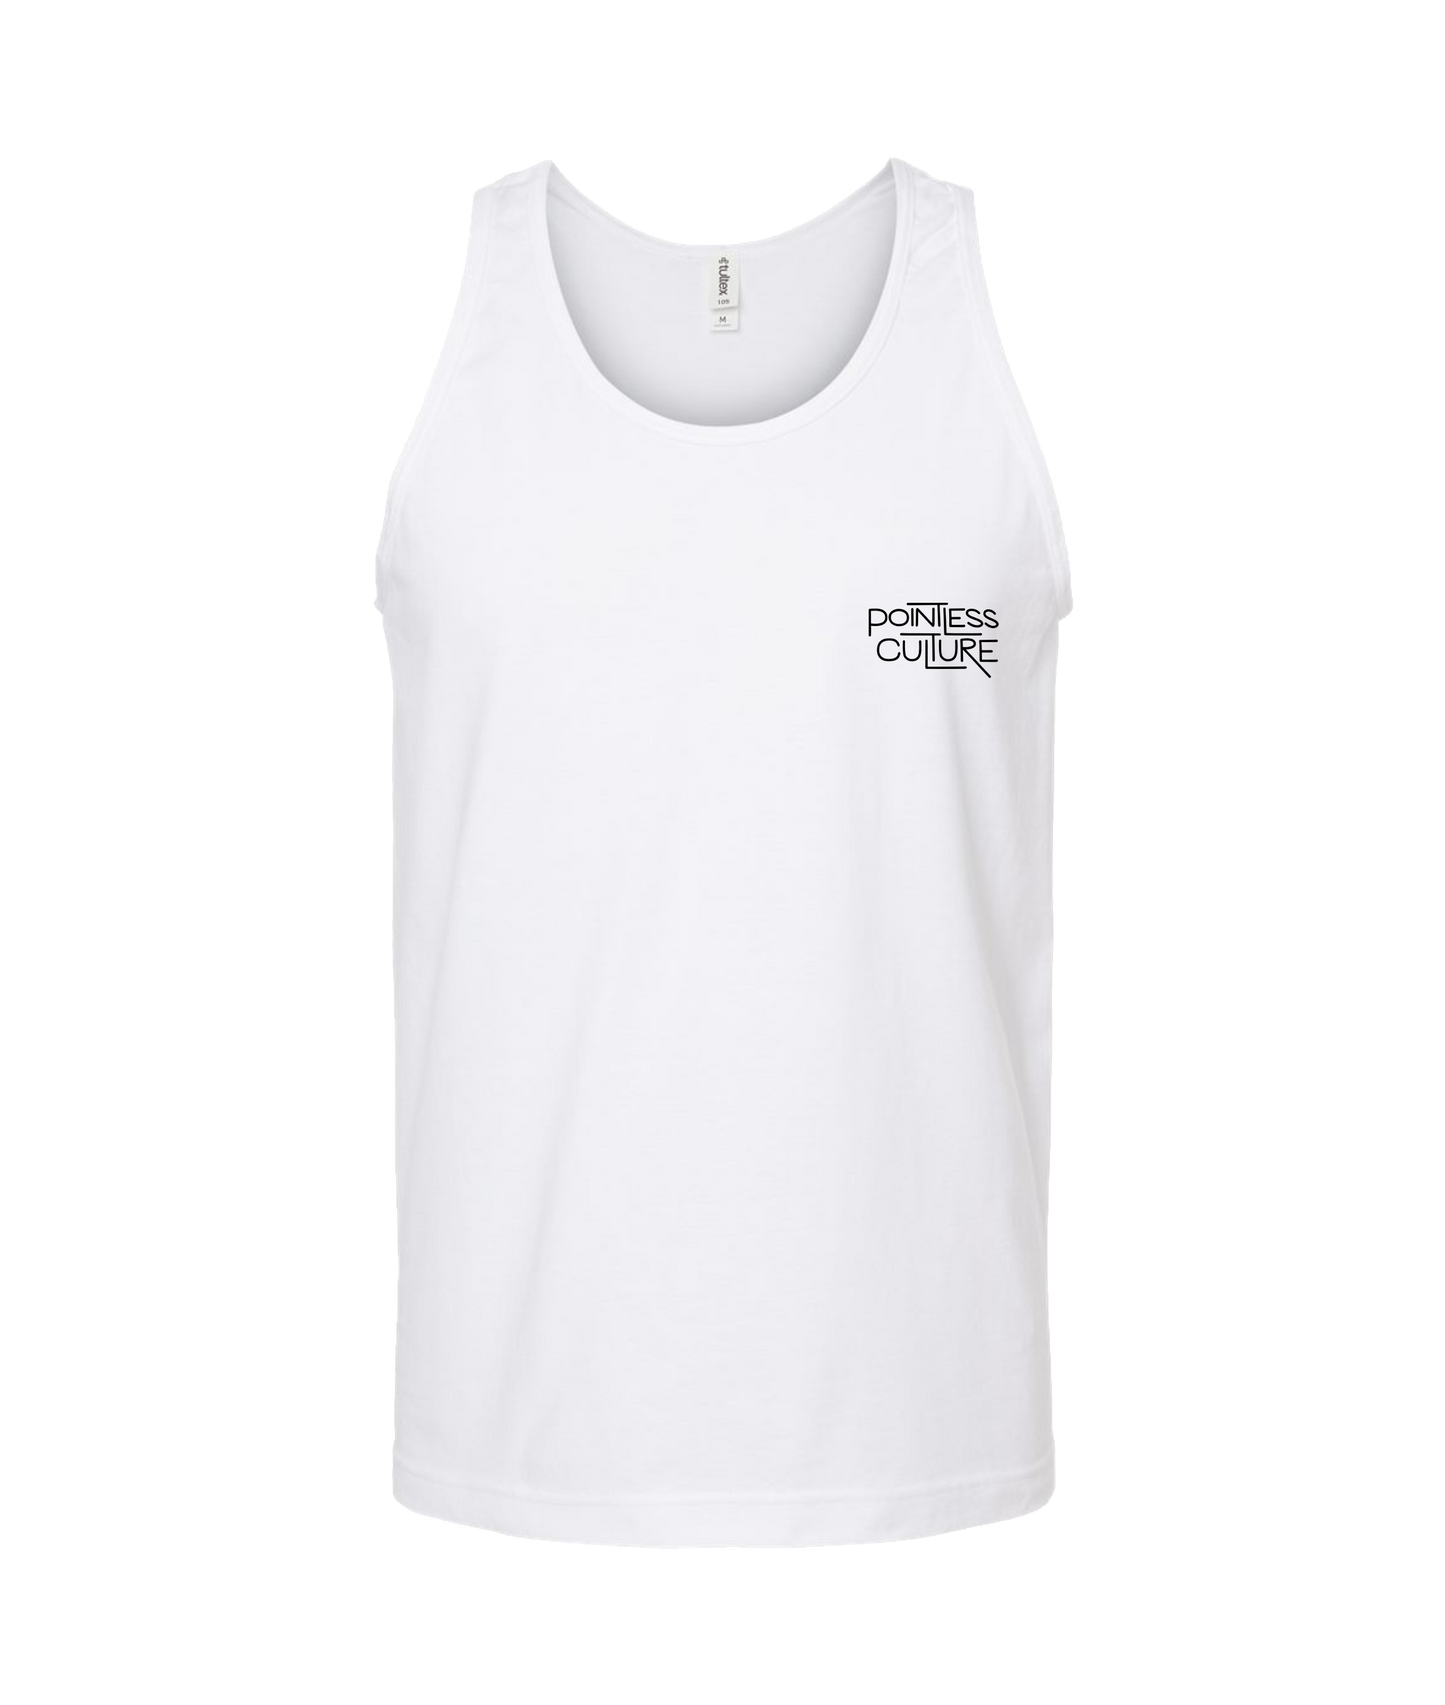 Pointless Culture - Pointless Culture - White Tank Top